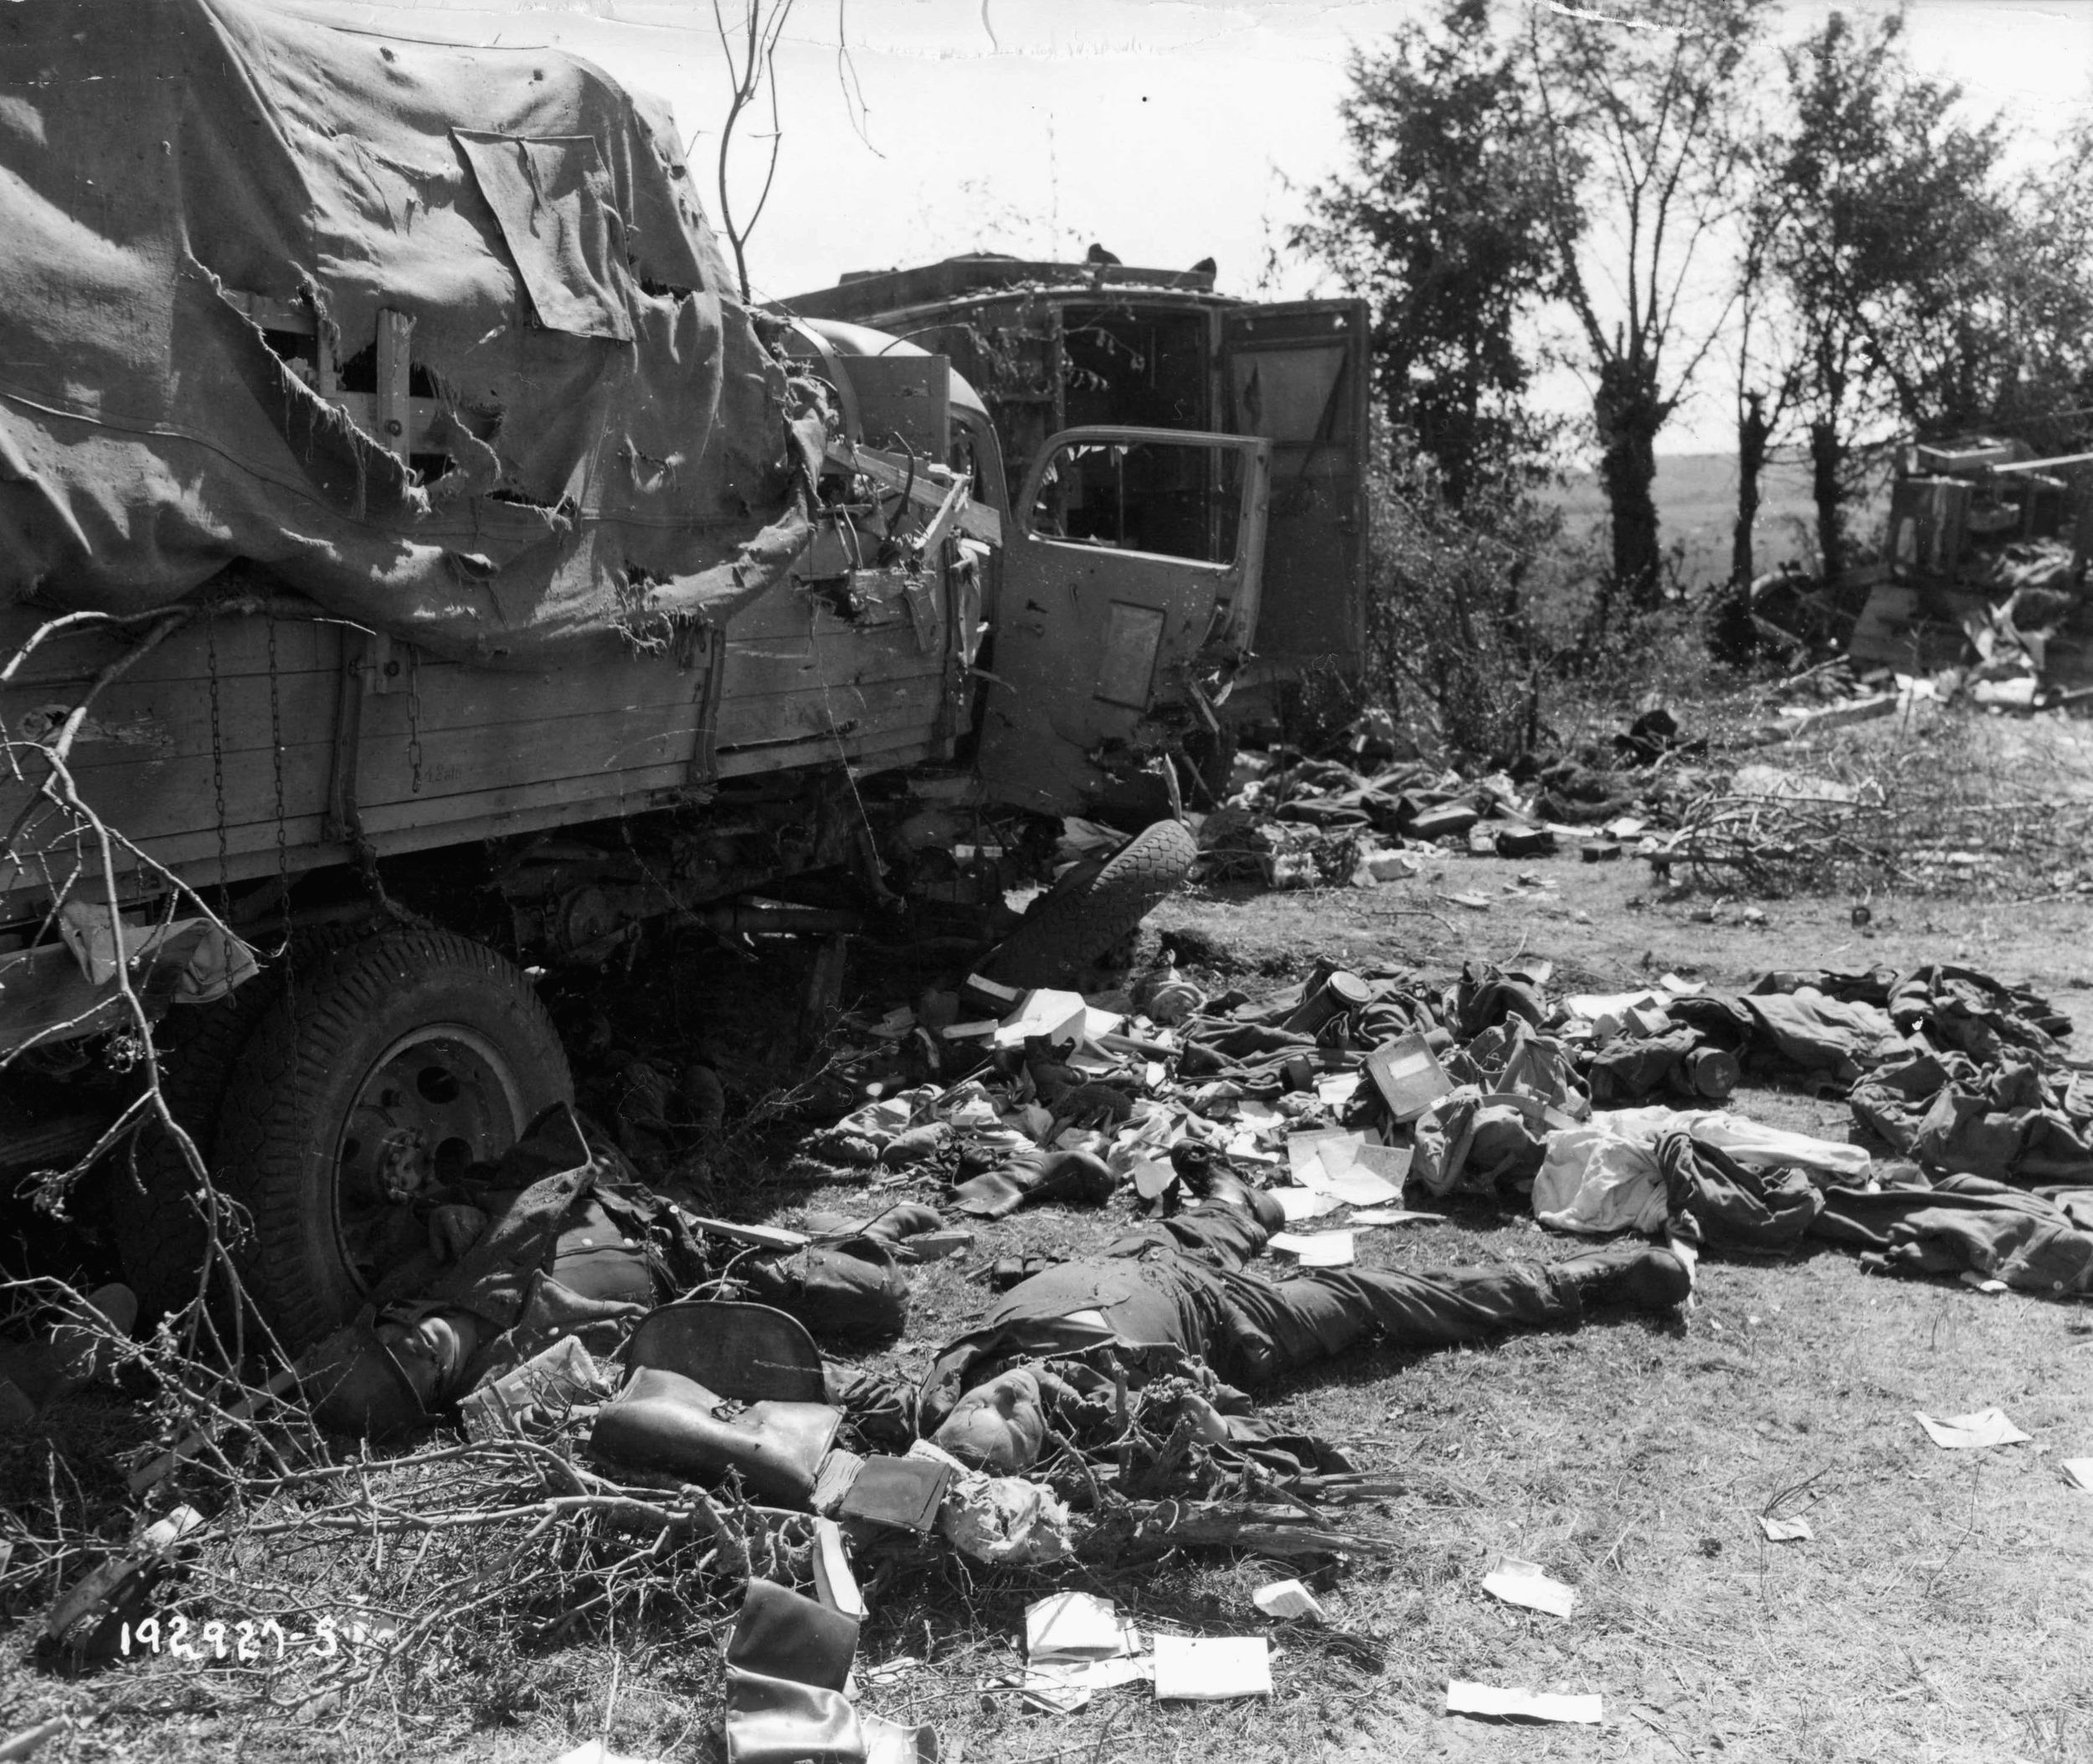 During its thwarted attempt to escape encirclement in the Falaise Pocket, this German convoy has been bombed and strafed by Allied fighters, leaving it a twisted mass of wreckage and dead bodies.